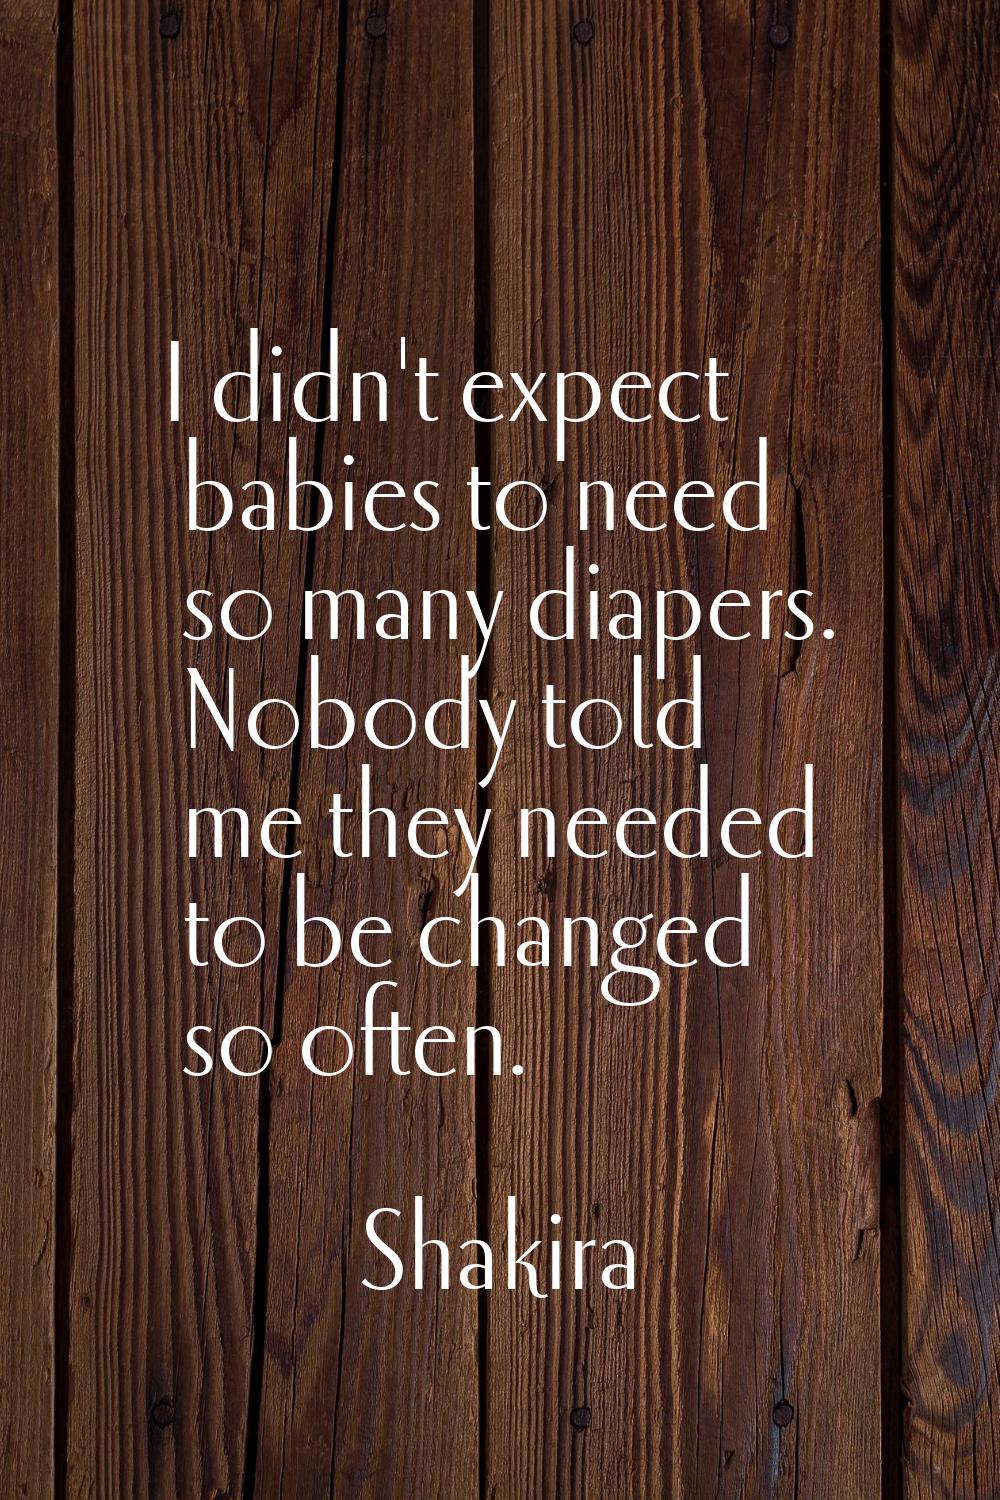 I didn't expect babies to need so many diapers. Nobody told me they needed to be changed so often.